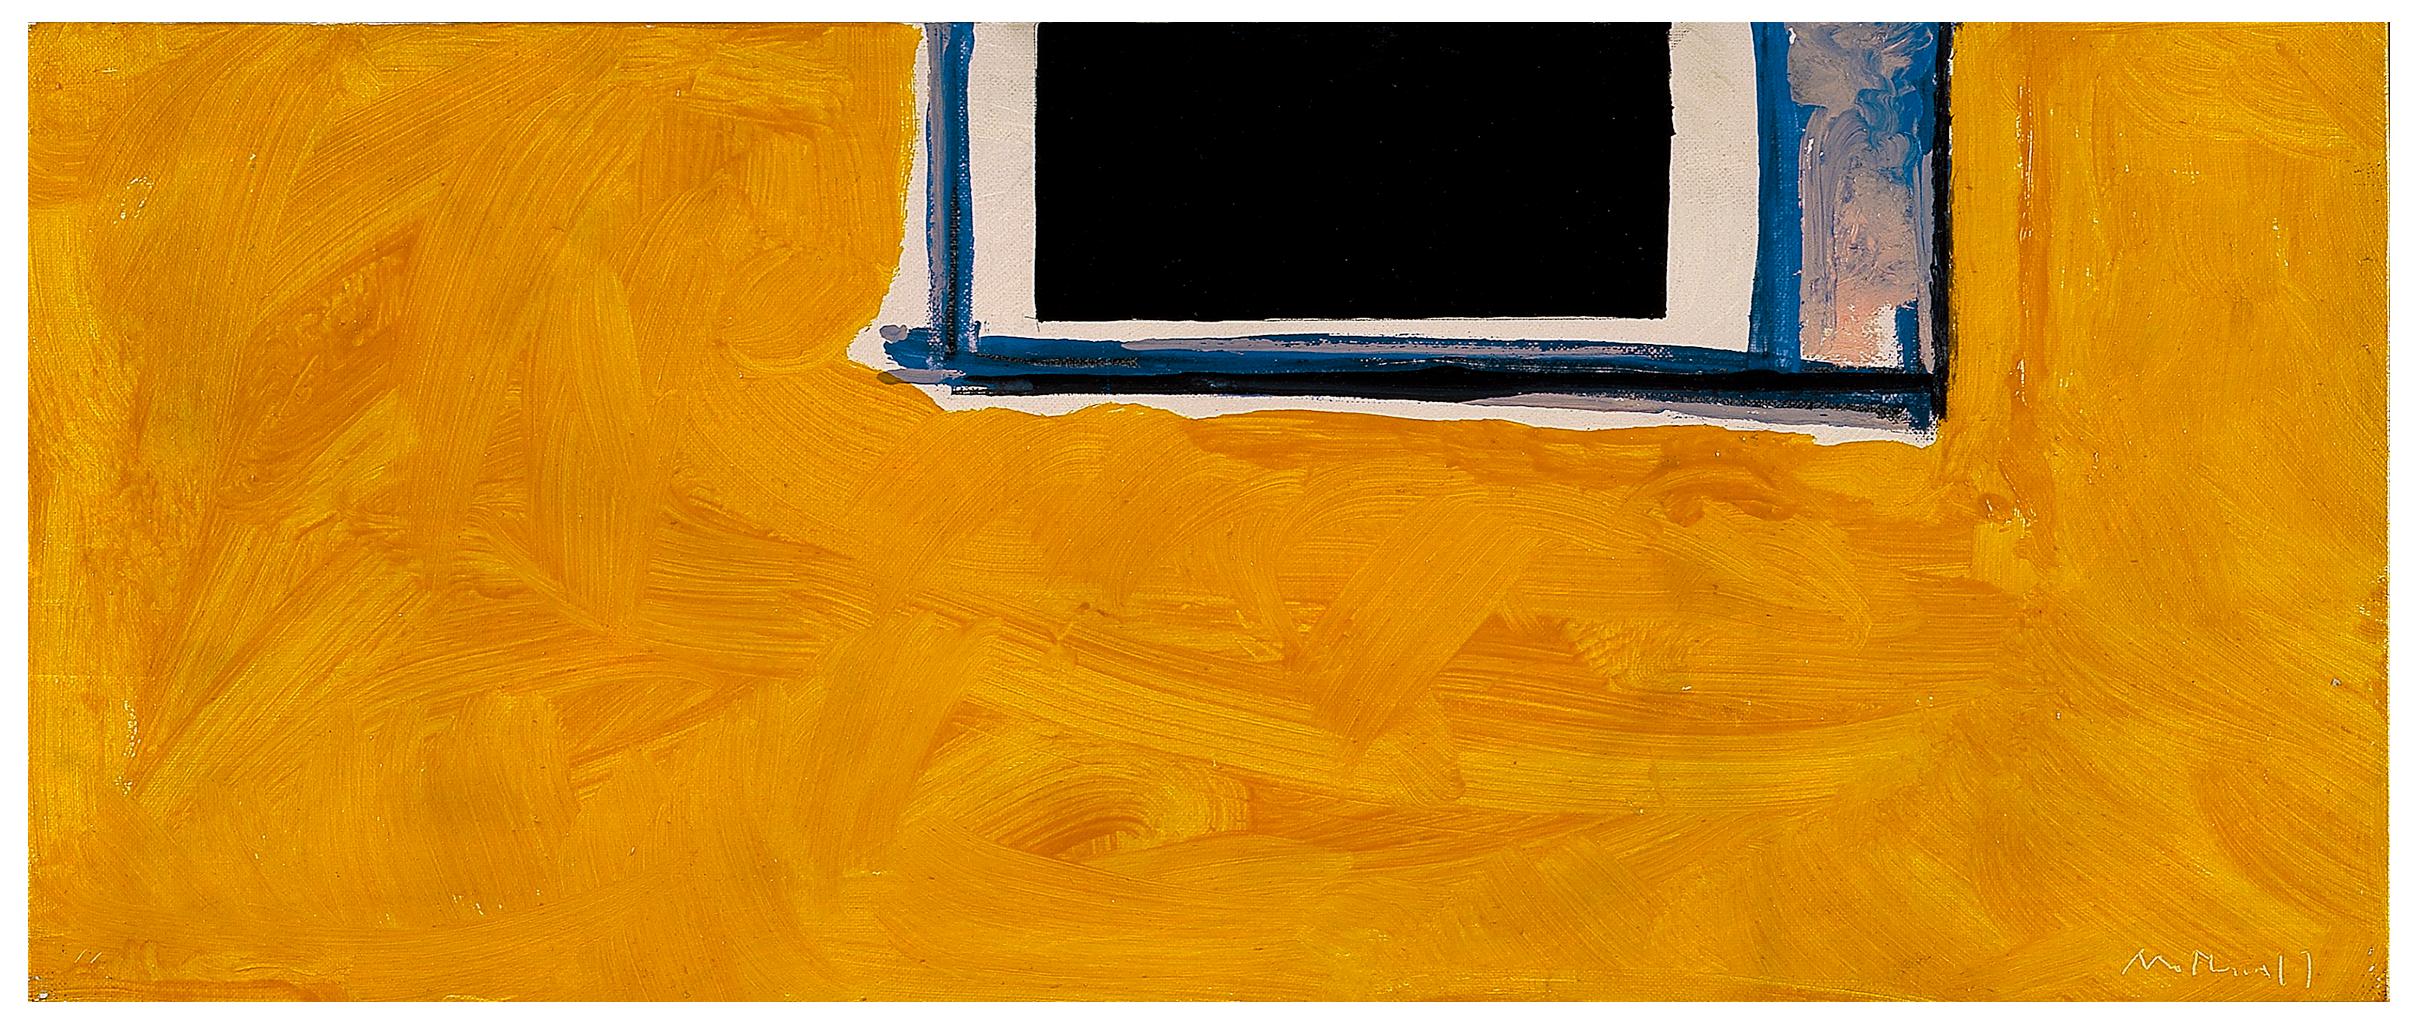 Robert Motherwell Abstract Painting - Untitled (Open in Yellow, Black and Blue)